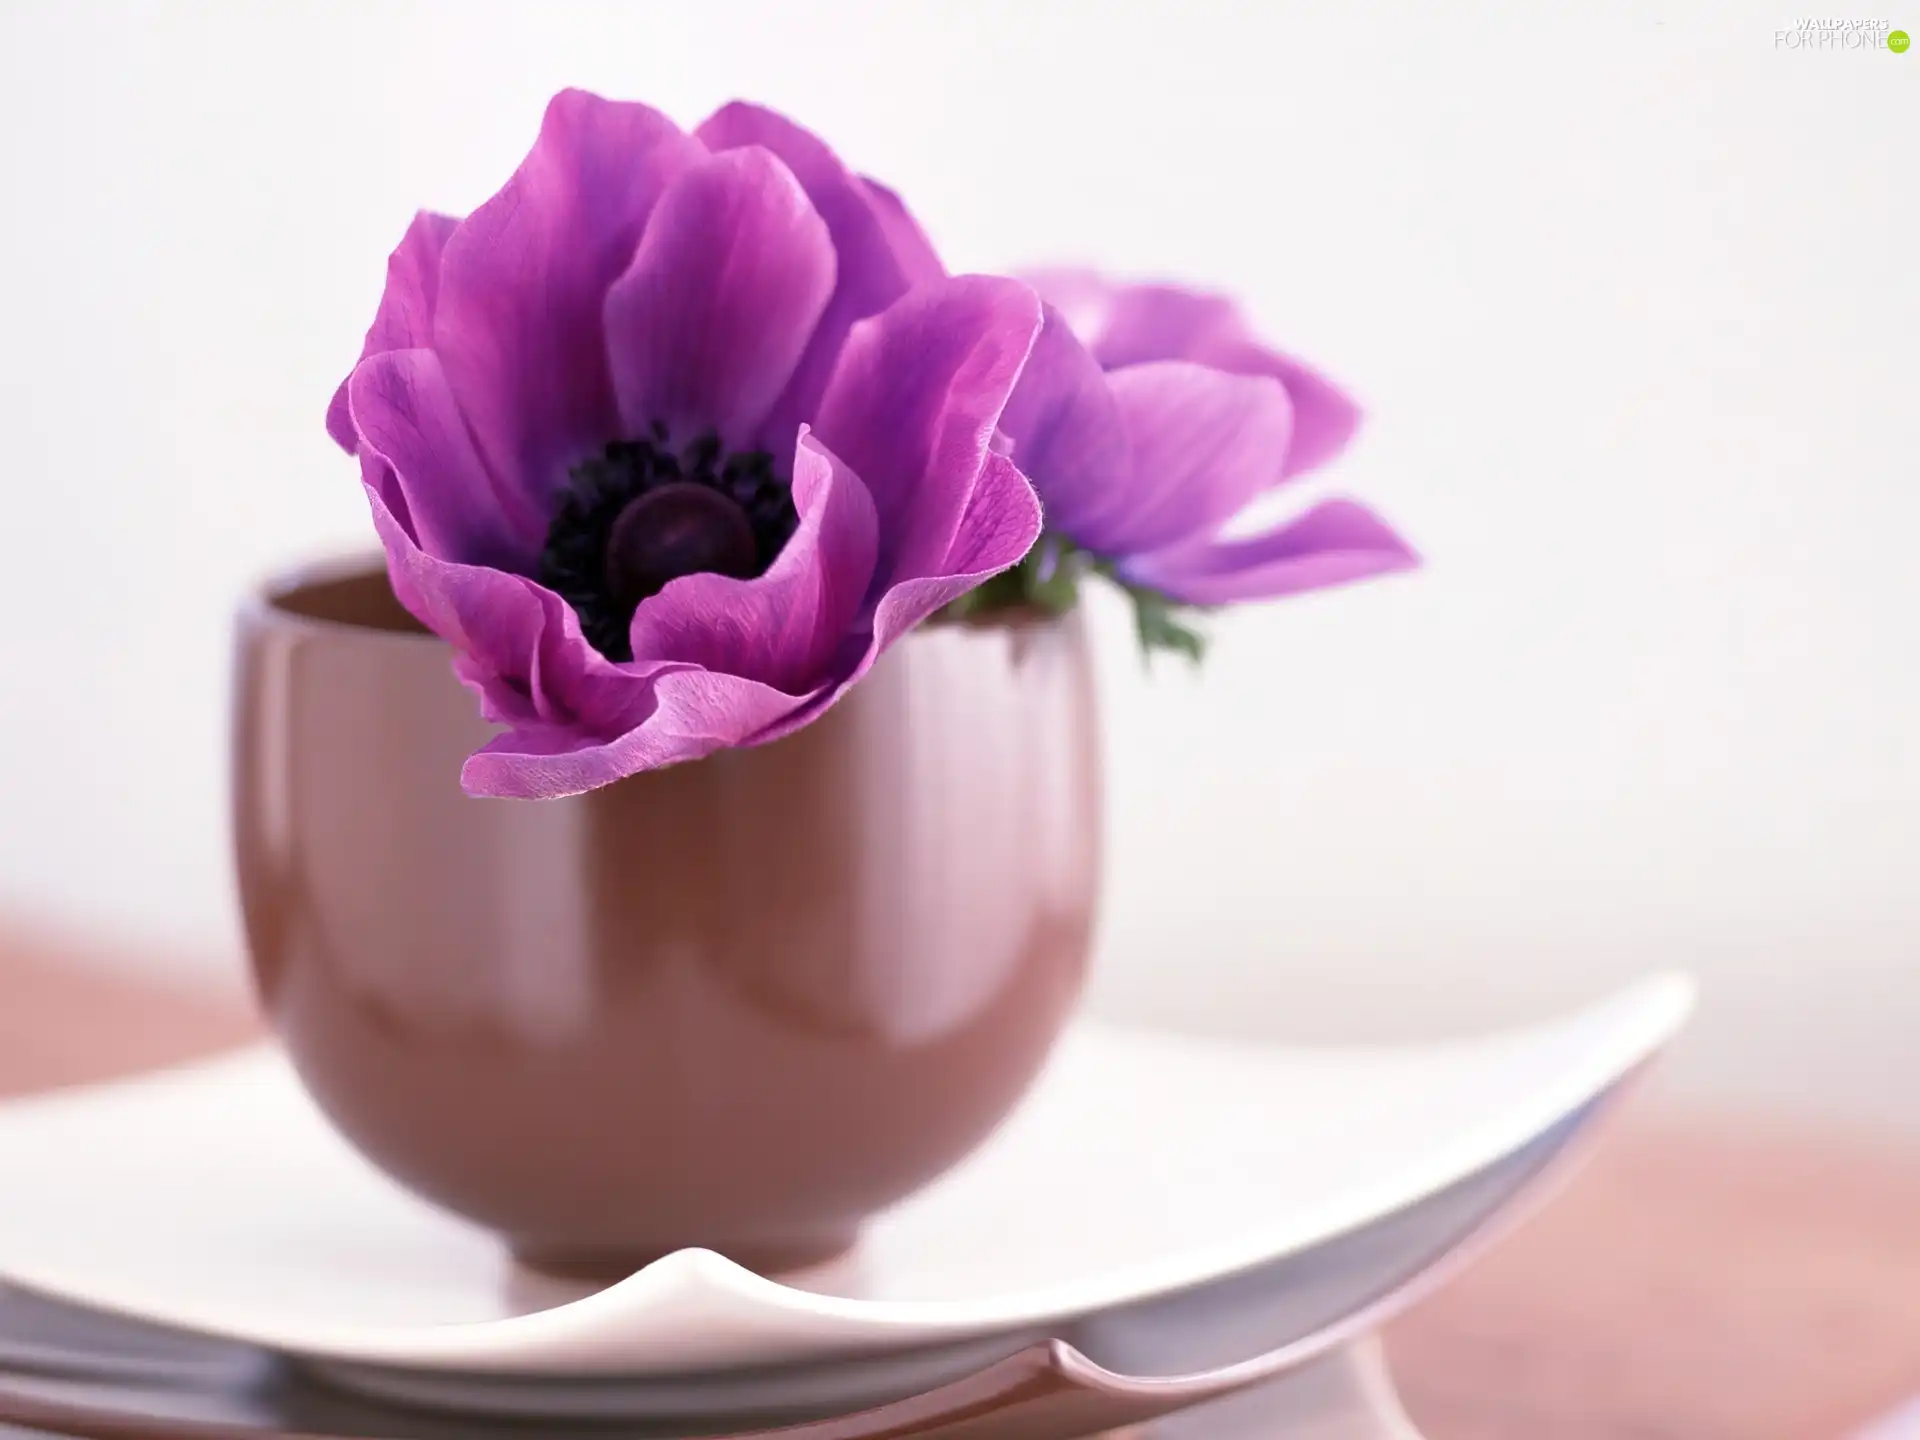 saucer, Violet, Colourfull Flowers, cup